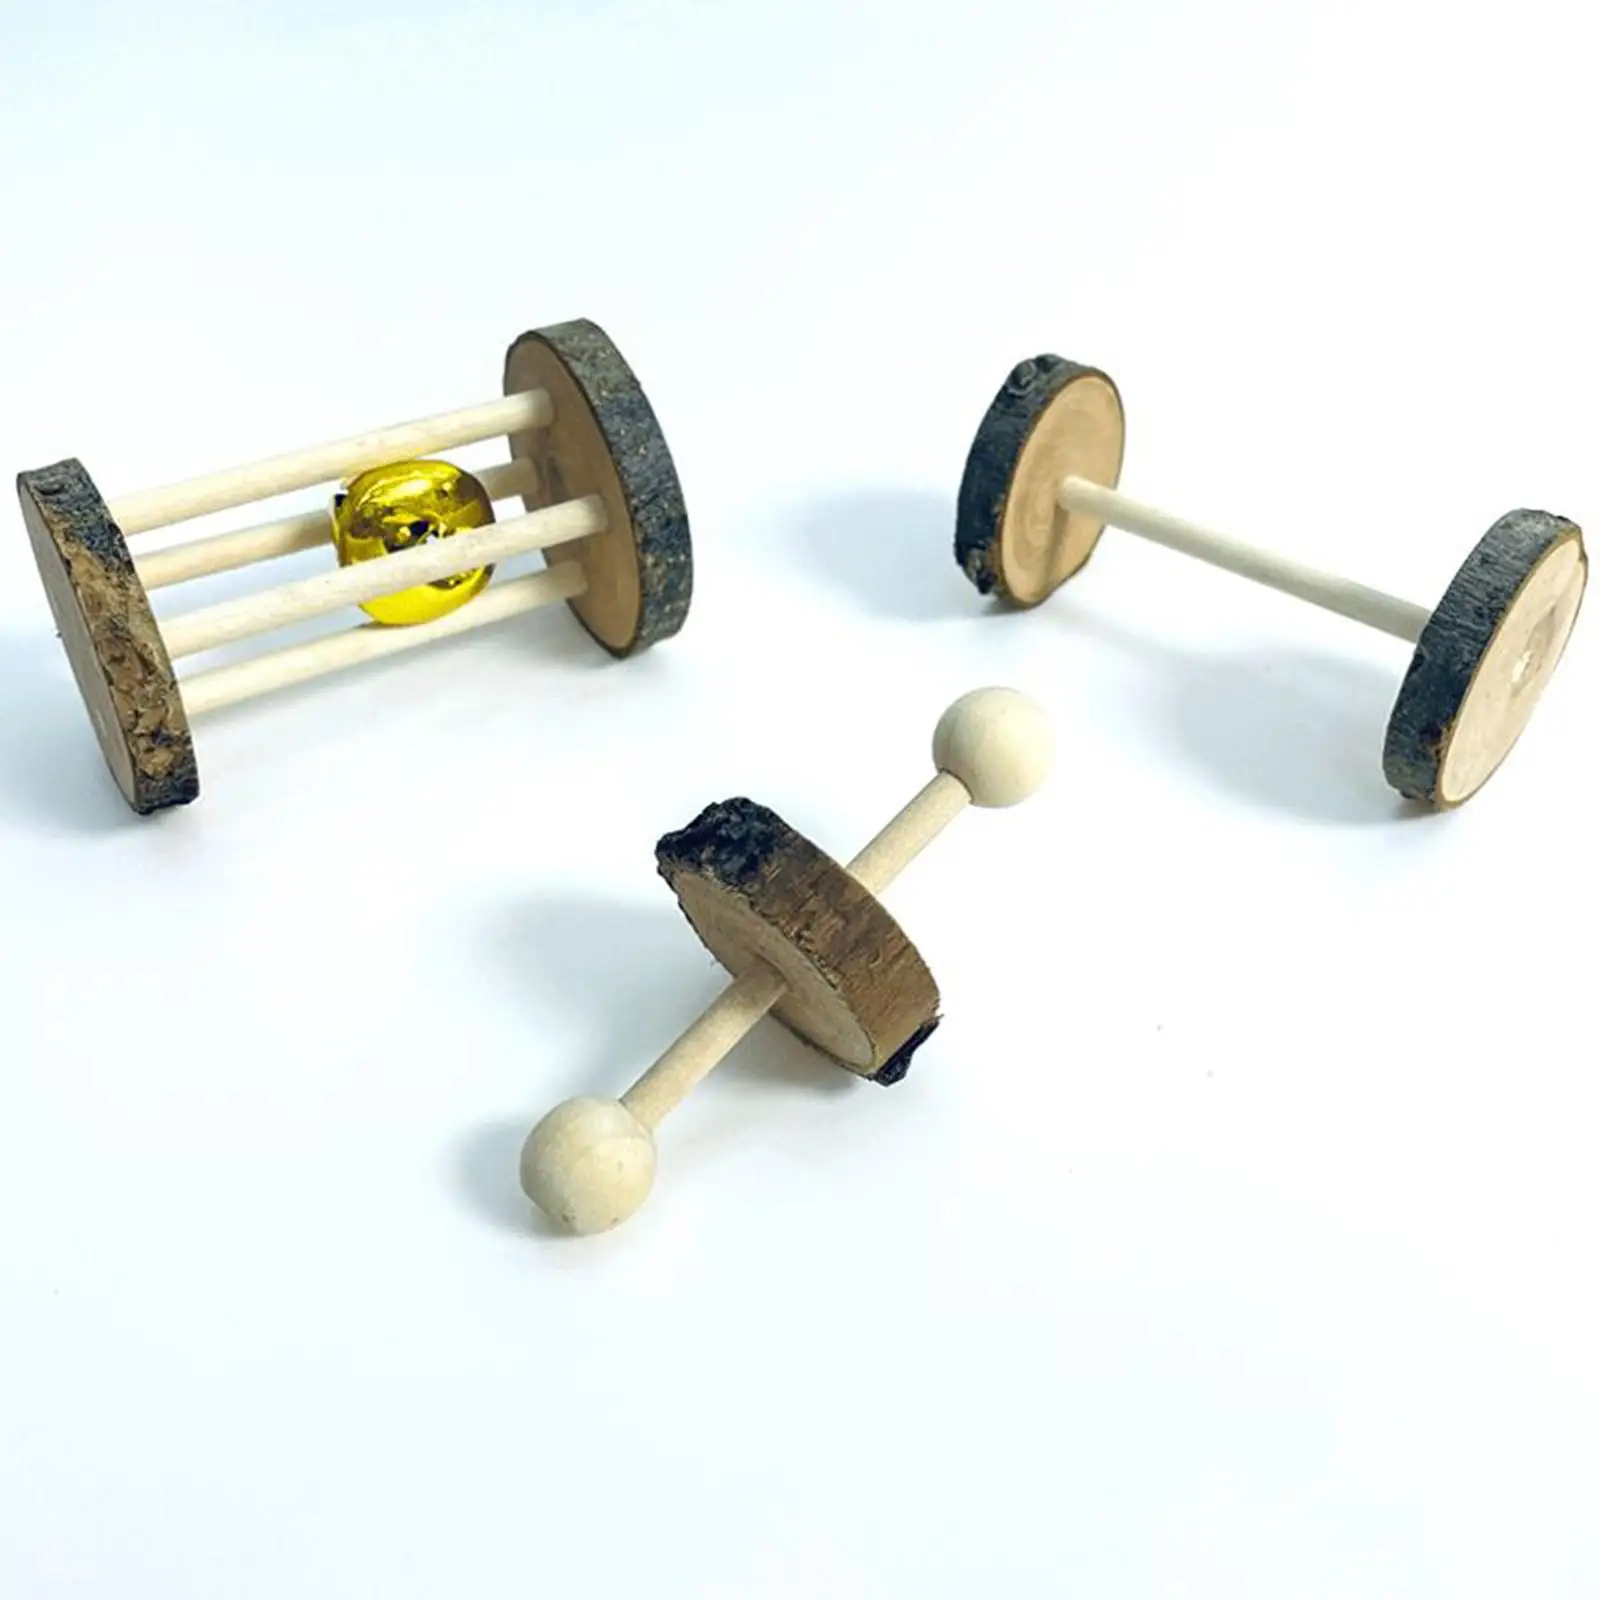 3 Pieces Wooden Pets Supplies Dumbbell Chewing Nibble Toy Small Animals Hamster Cage Accessories Hamster Toy Pet Wooden Toys